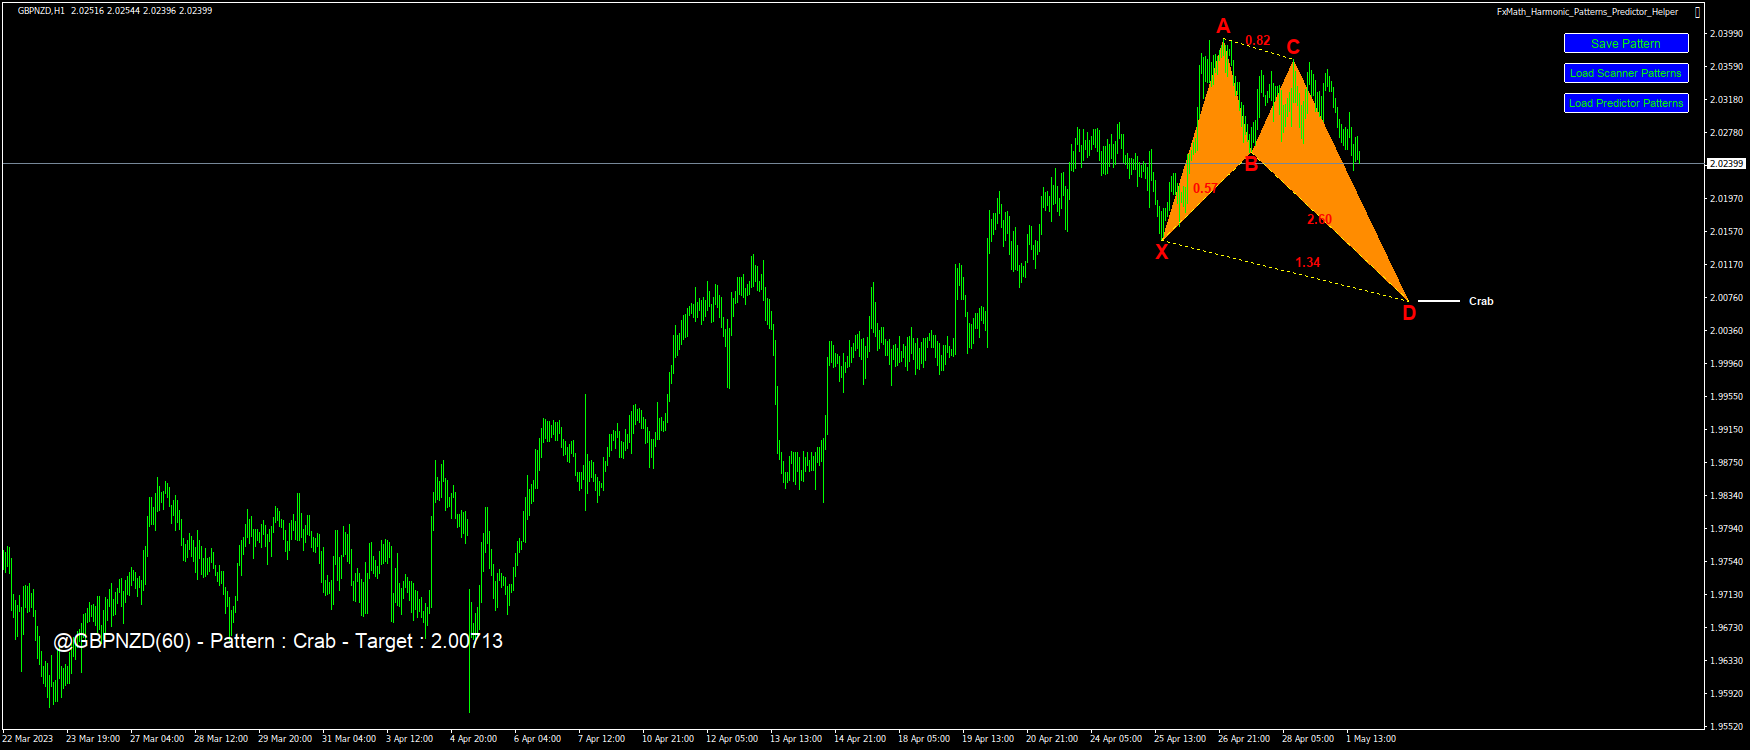 @GBPNZD(60) – Pattern : Crab – Target : 2.00713-2023.05.01 19:19